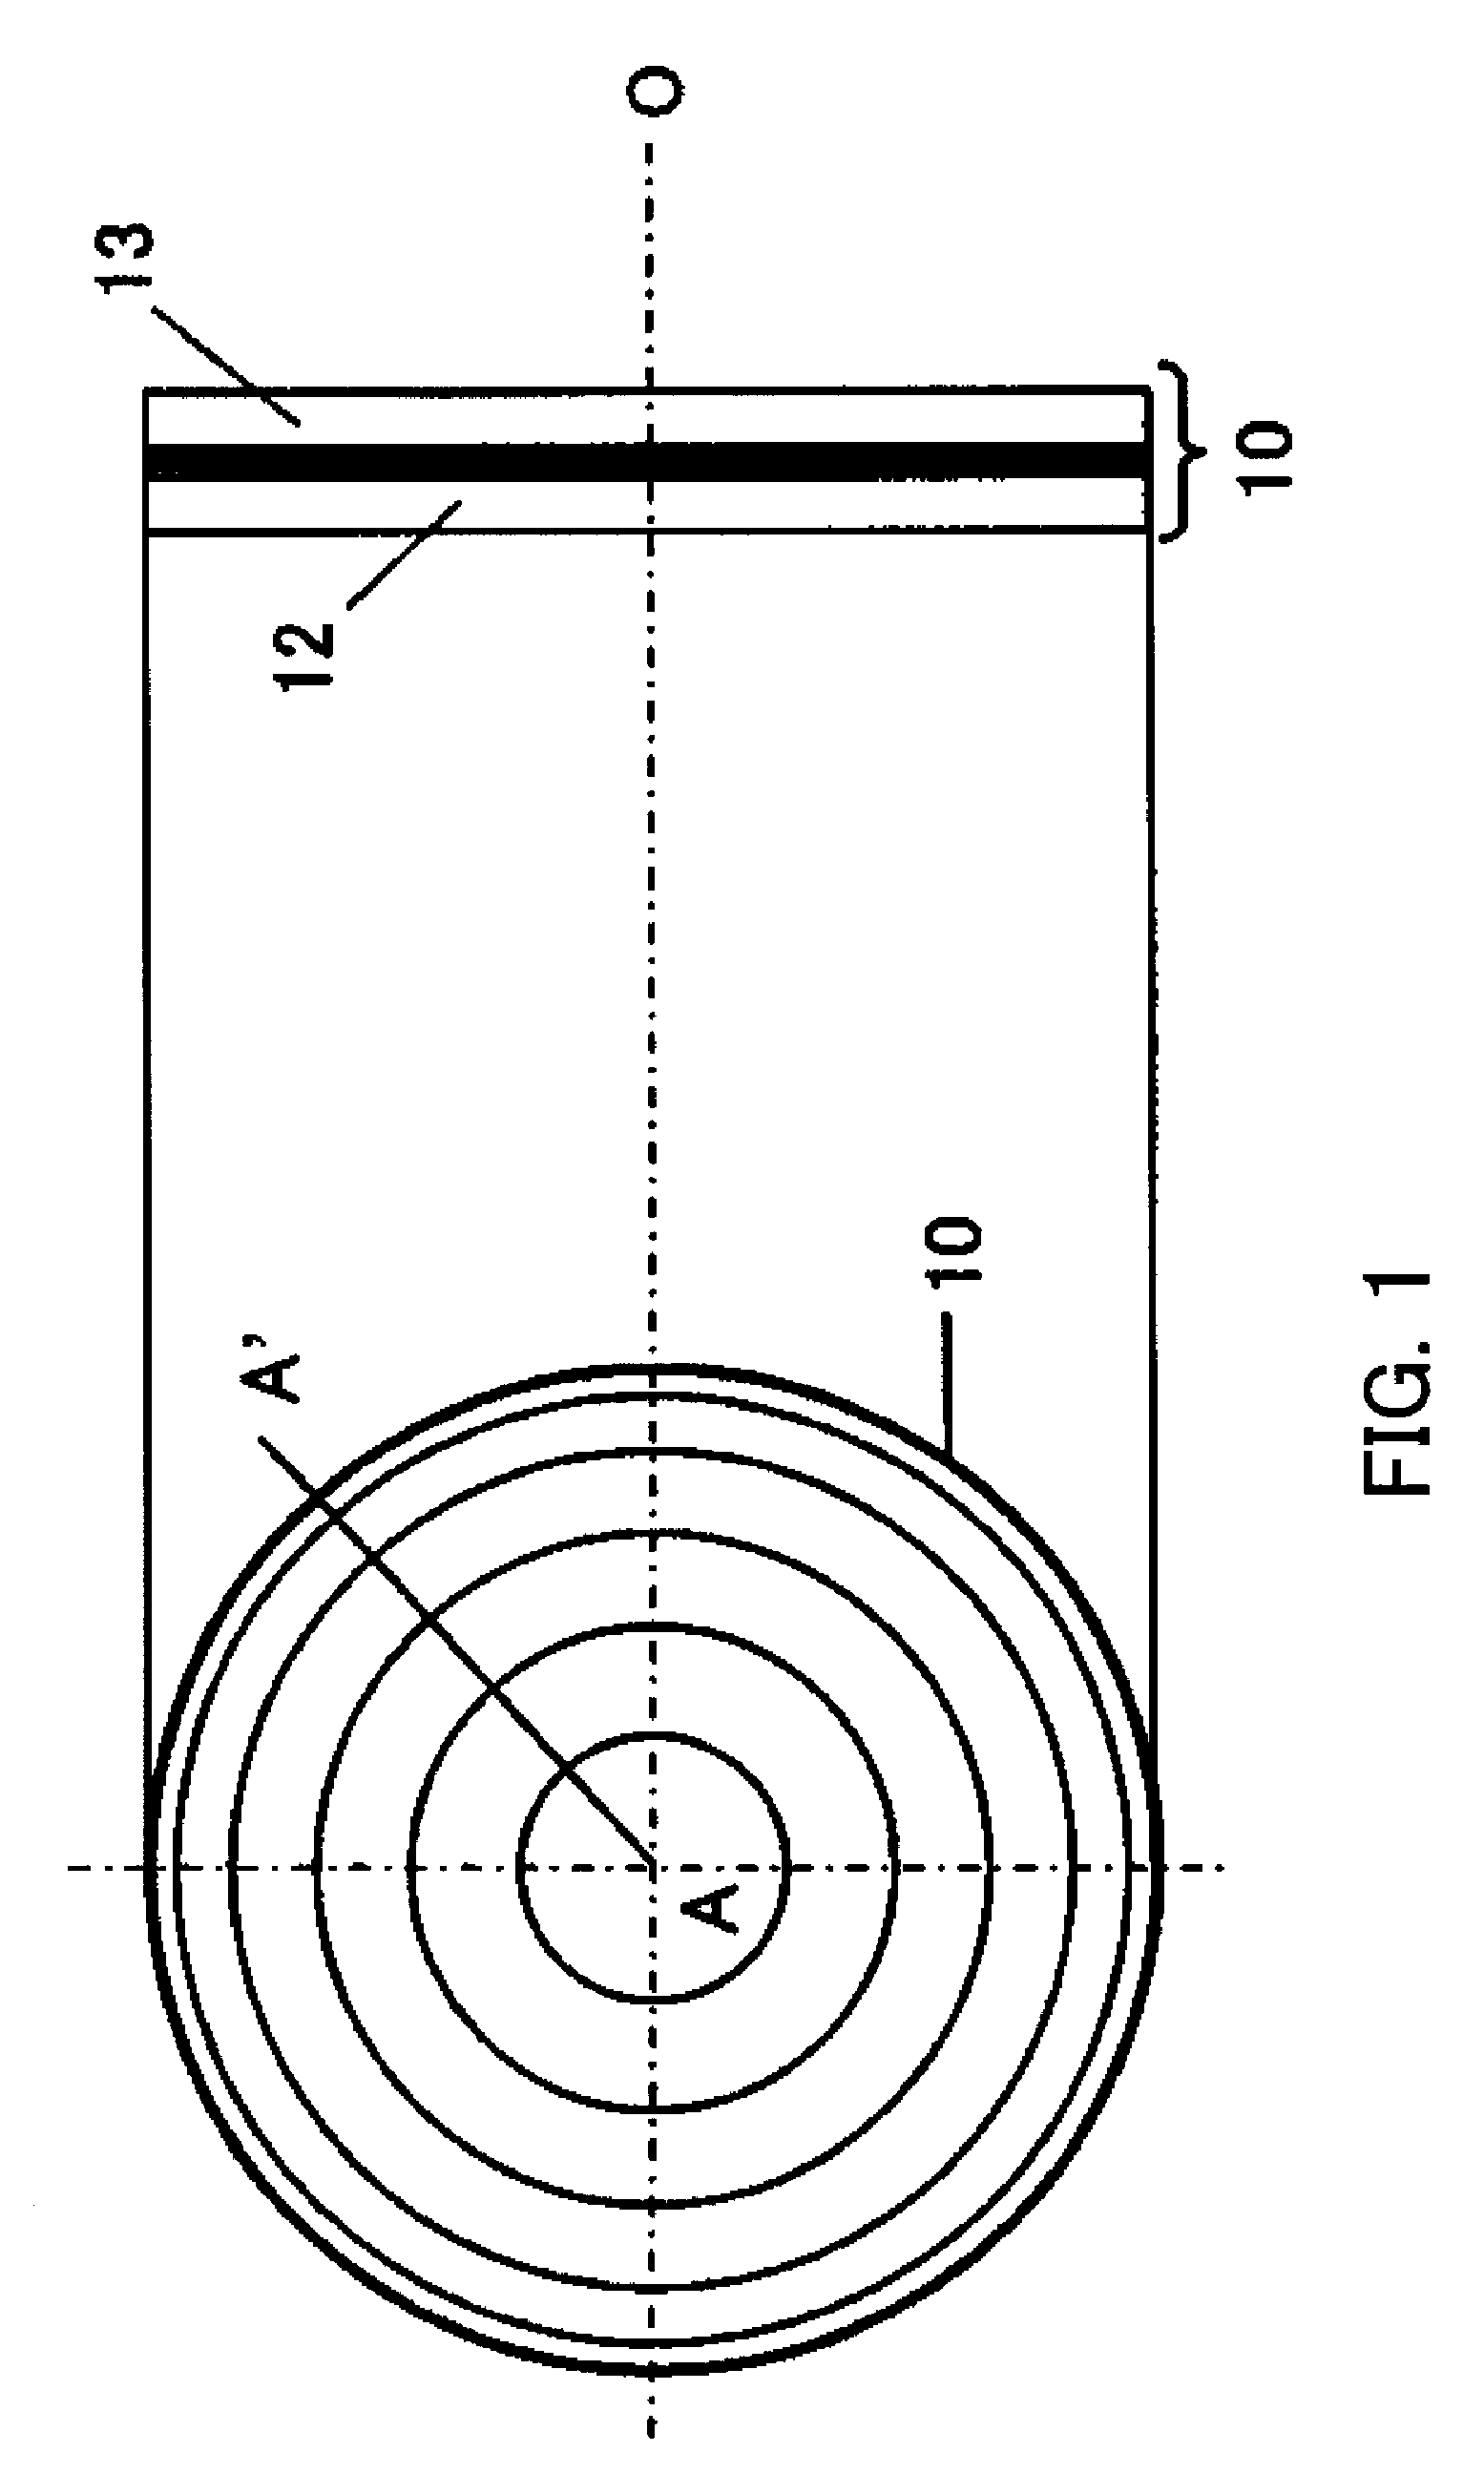 Diffractive optical element, optical system and optical apparatus